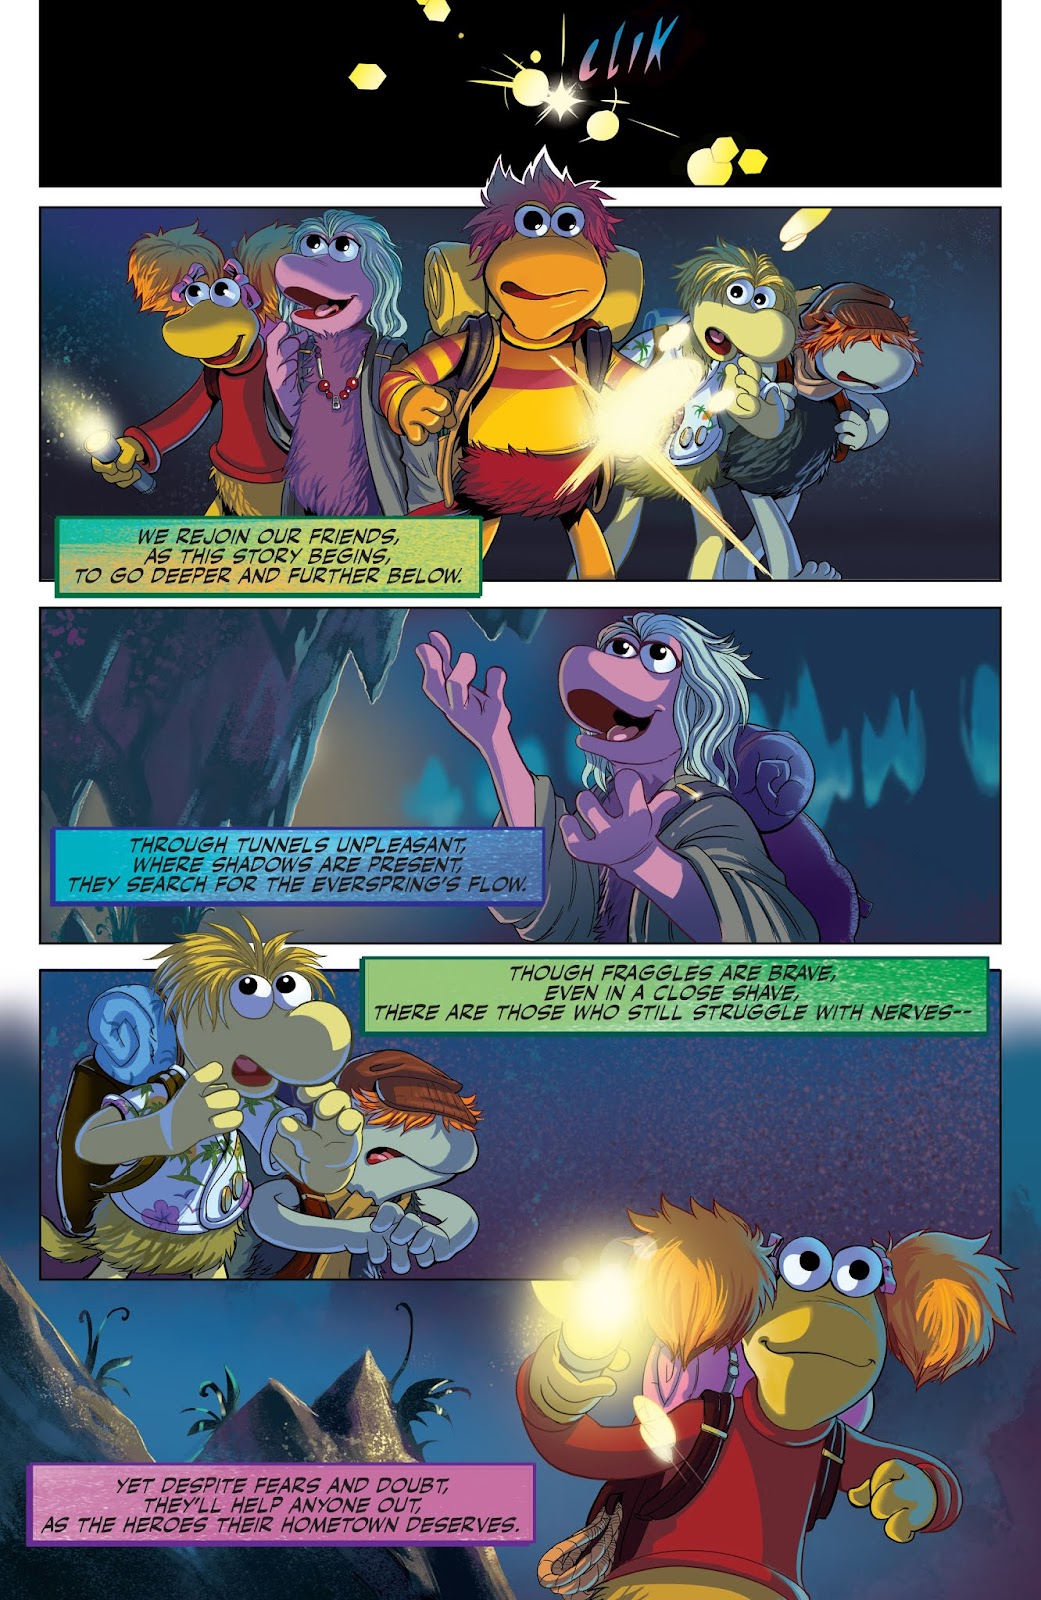 Jim Henson's Fraggle Rock: Journey to the Everspring issue 2 - Page 3